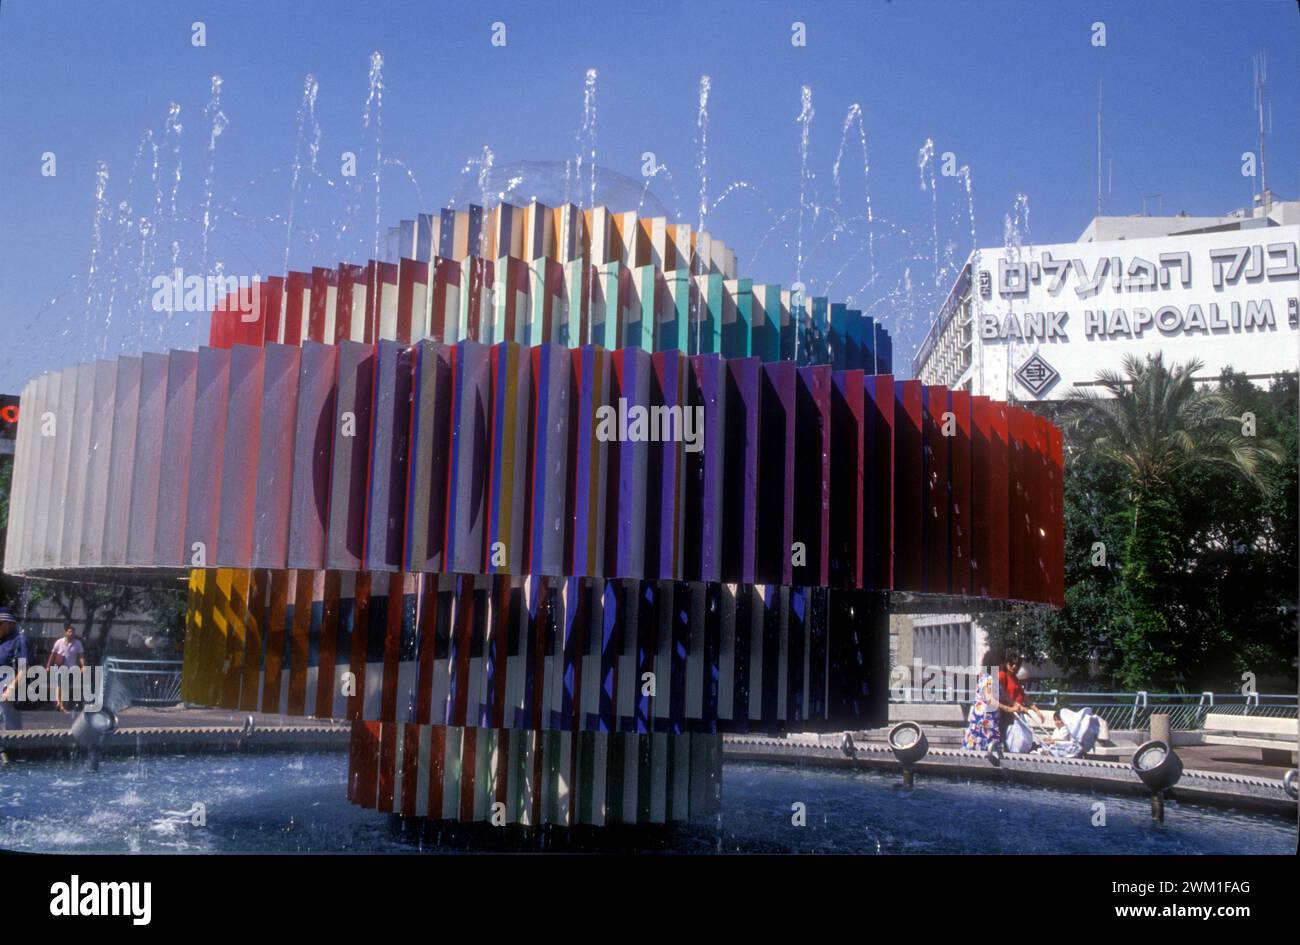 4068287 TEL AVIV, Israel. “Fire and Water Fountain” designed by Yaacov Agam, also commonly referred to as the “Dizengoff Square Fountain” or 'Dizengoff Fountain' . TEL AVIV, Israele. Fontana del Fuoco e dell'Acqua progettata da Yaacov Agam, detta anche Fontana Dizengoff o Fontana di piazza Dizengoff; (add.info.: TEL AVIV, Israel. “Fire and Water Fountain” designed by Yaacov Agam, also commonly referred to as the “Dizengoff Square Fountain” or 'Dizengoff Fountain' . TEL AVIV, Israele. Fontana del Fuoco e dell'Acqua progettata da Yaacov Agam, detta anche Fontana Dizengoff o Fontana di piazza D Stock Photo